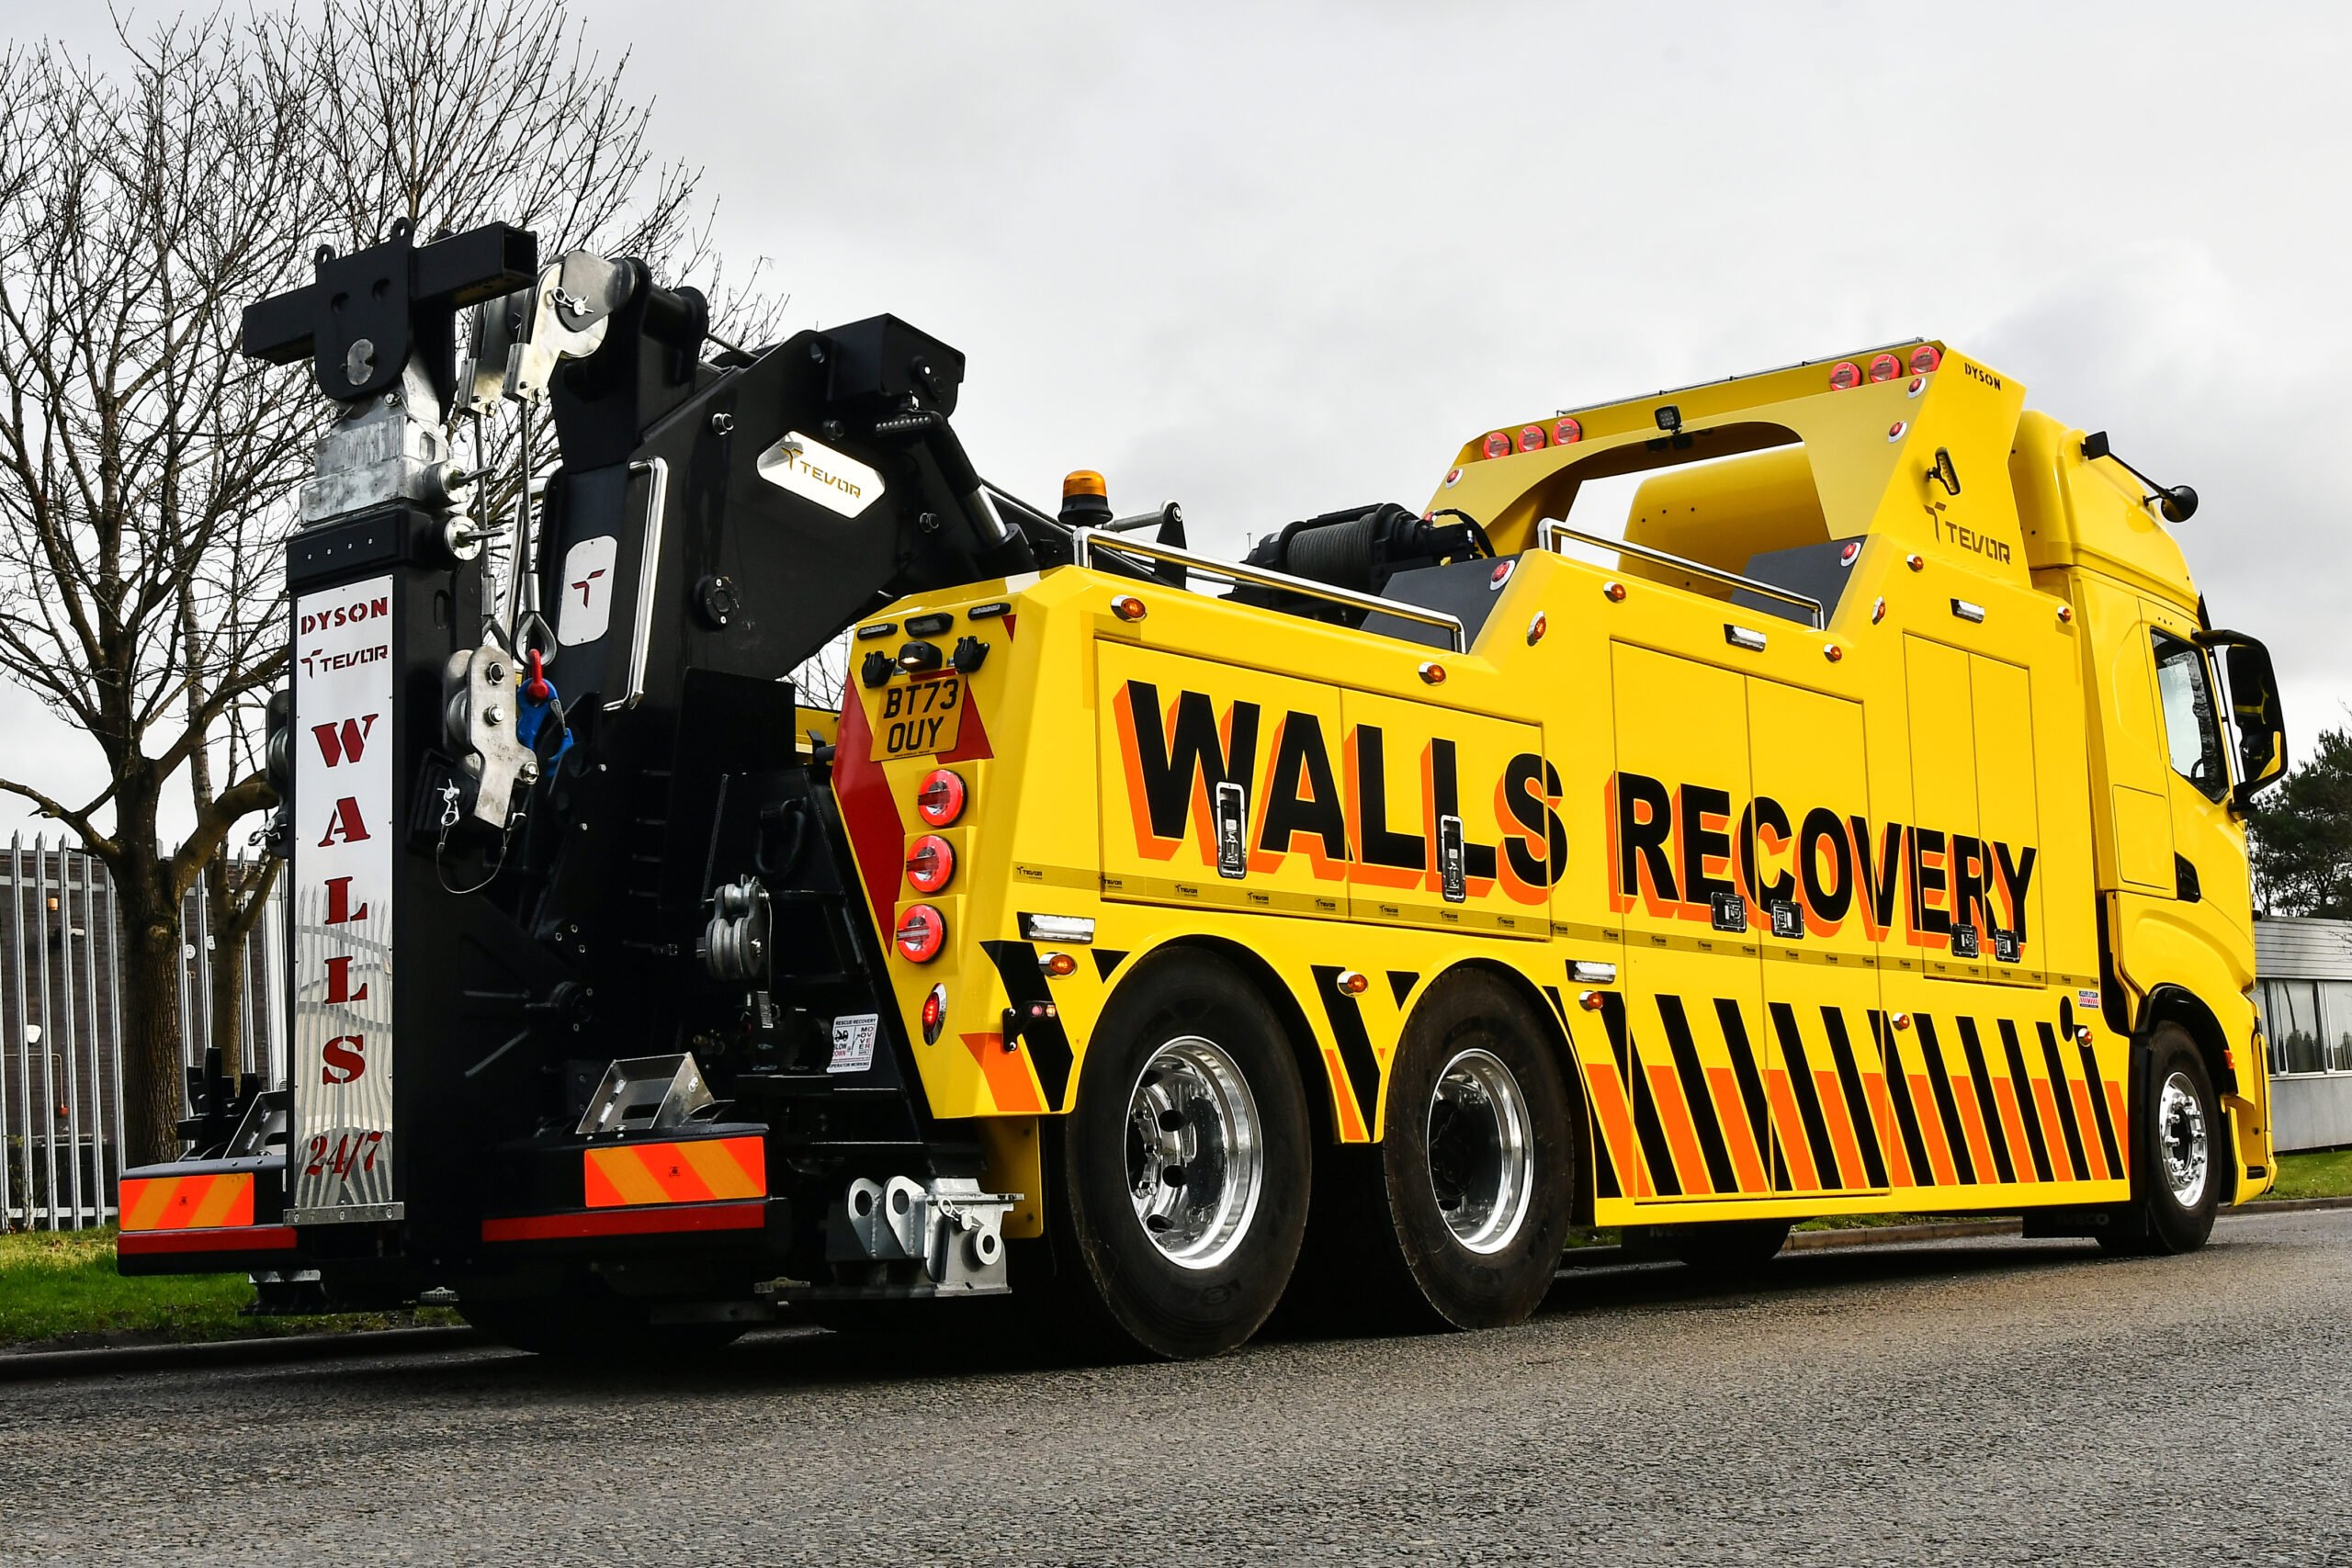 Walls IVECO X-Way recovery vehicle